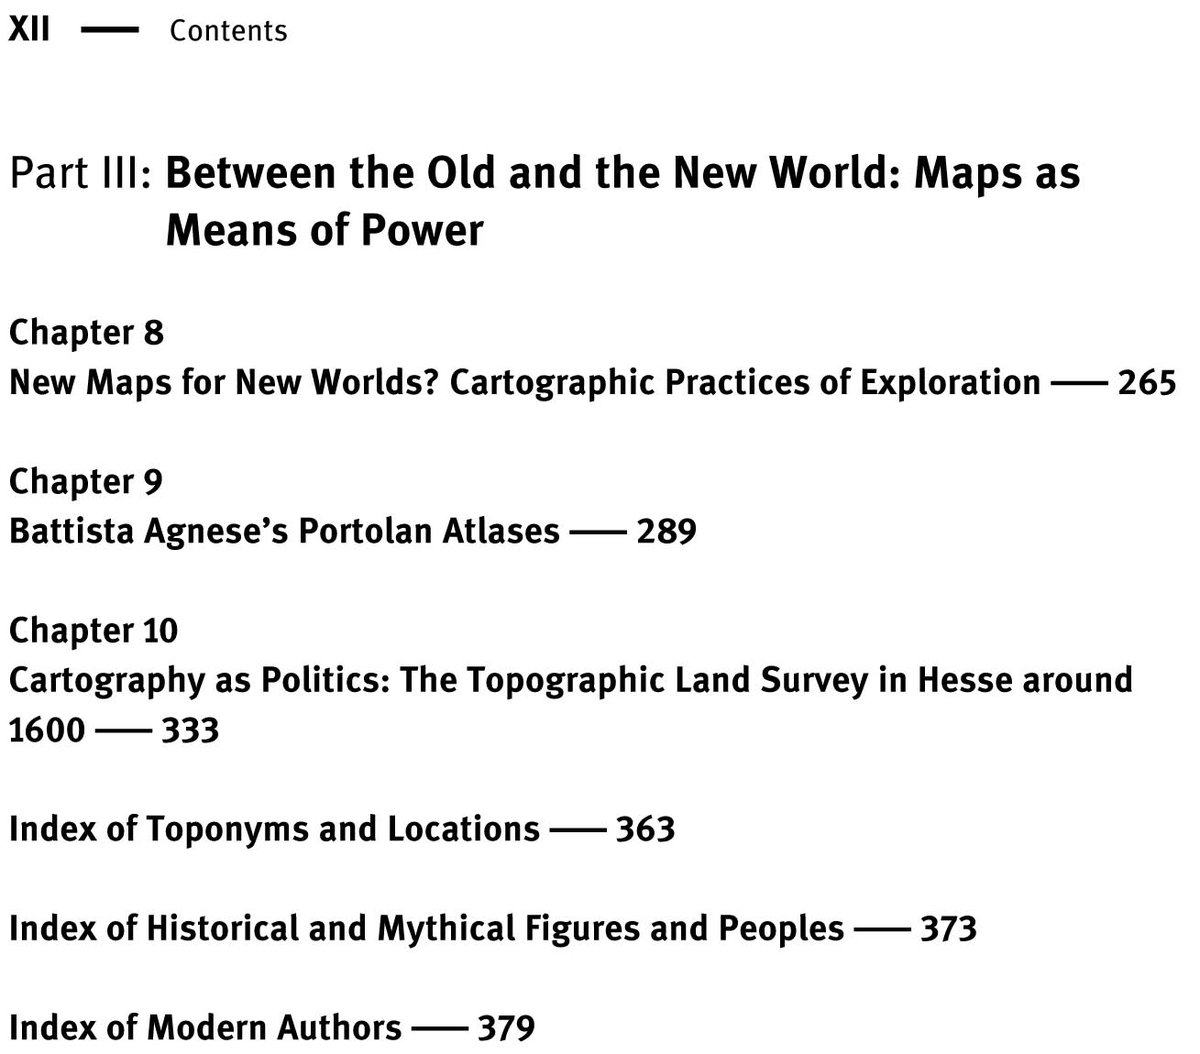 #OpenAccess #Cartography #PortolanAtlases #Travelogue #MedievalMaps #Jerusalem #TravelAccounts #Politics Mapping Narrations – Narrating Maps Concepts of the World in the Middle Ages and the Early Modern Period Ingrid Baumgärtner De Gruyter 2022 PDF🎯 library.oapen.org/viewer/web/vie…